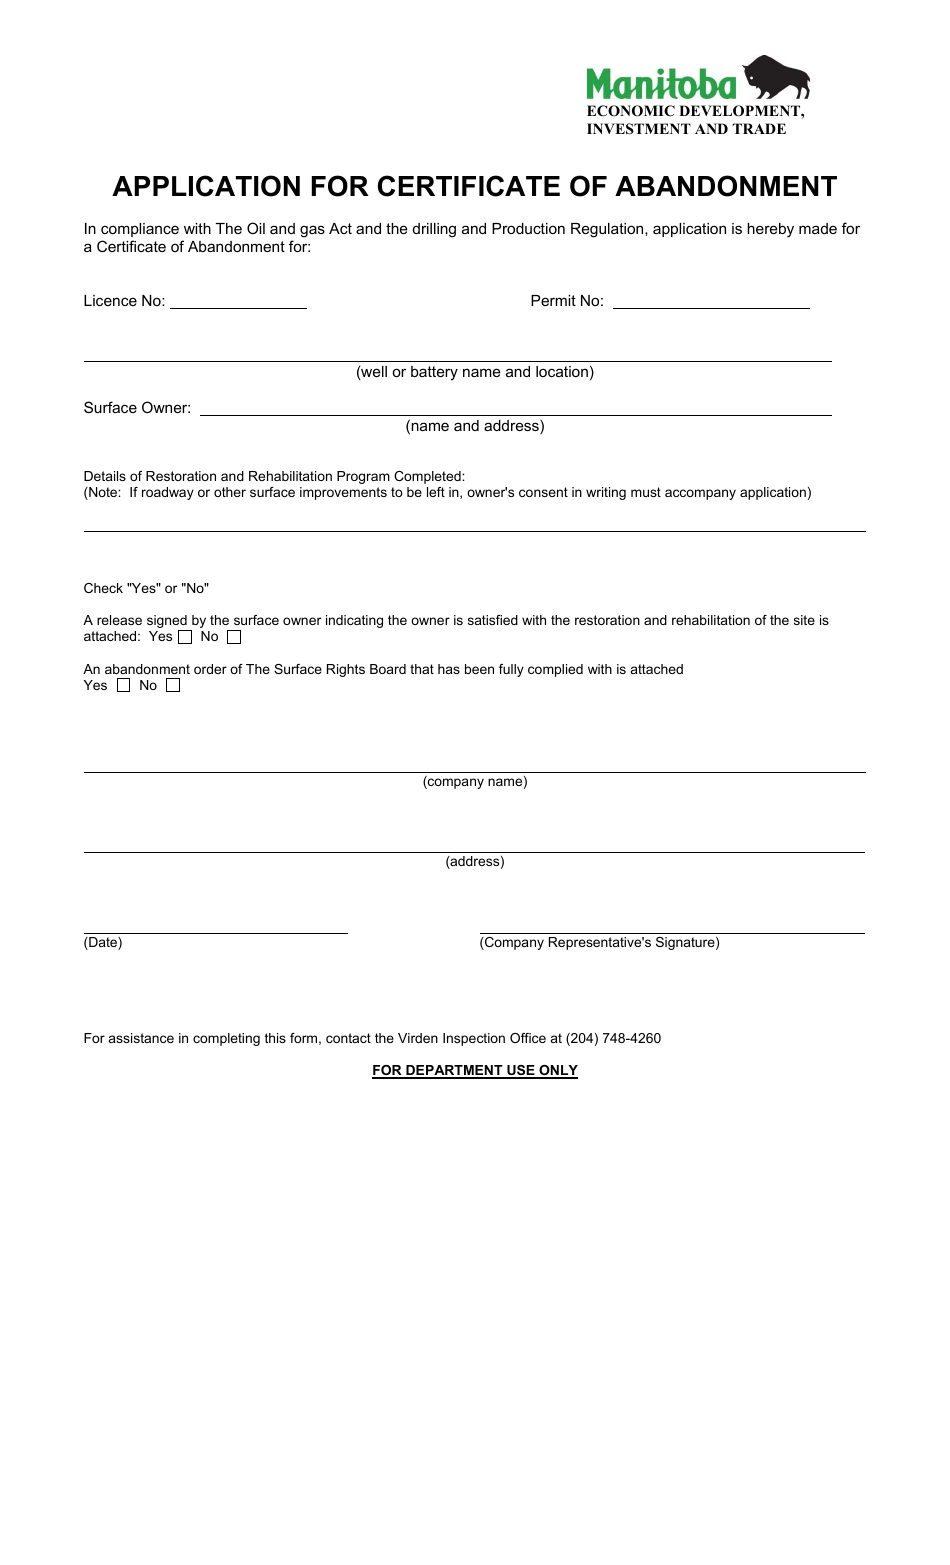 Application for Certificate of Abandonment - Manitoba, Canada, Page 1